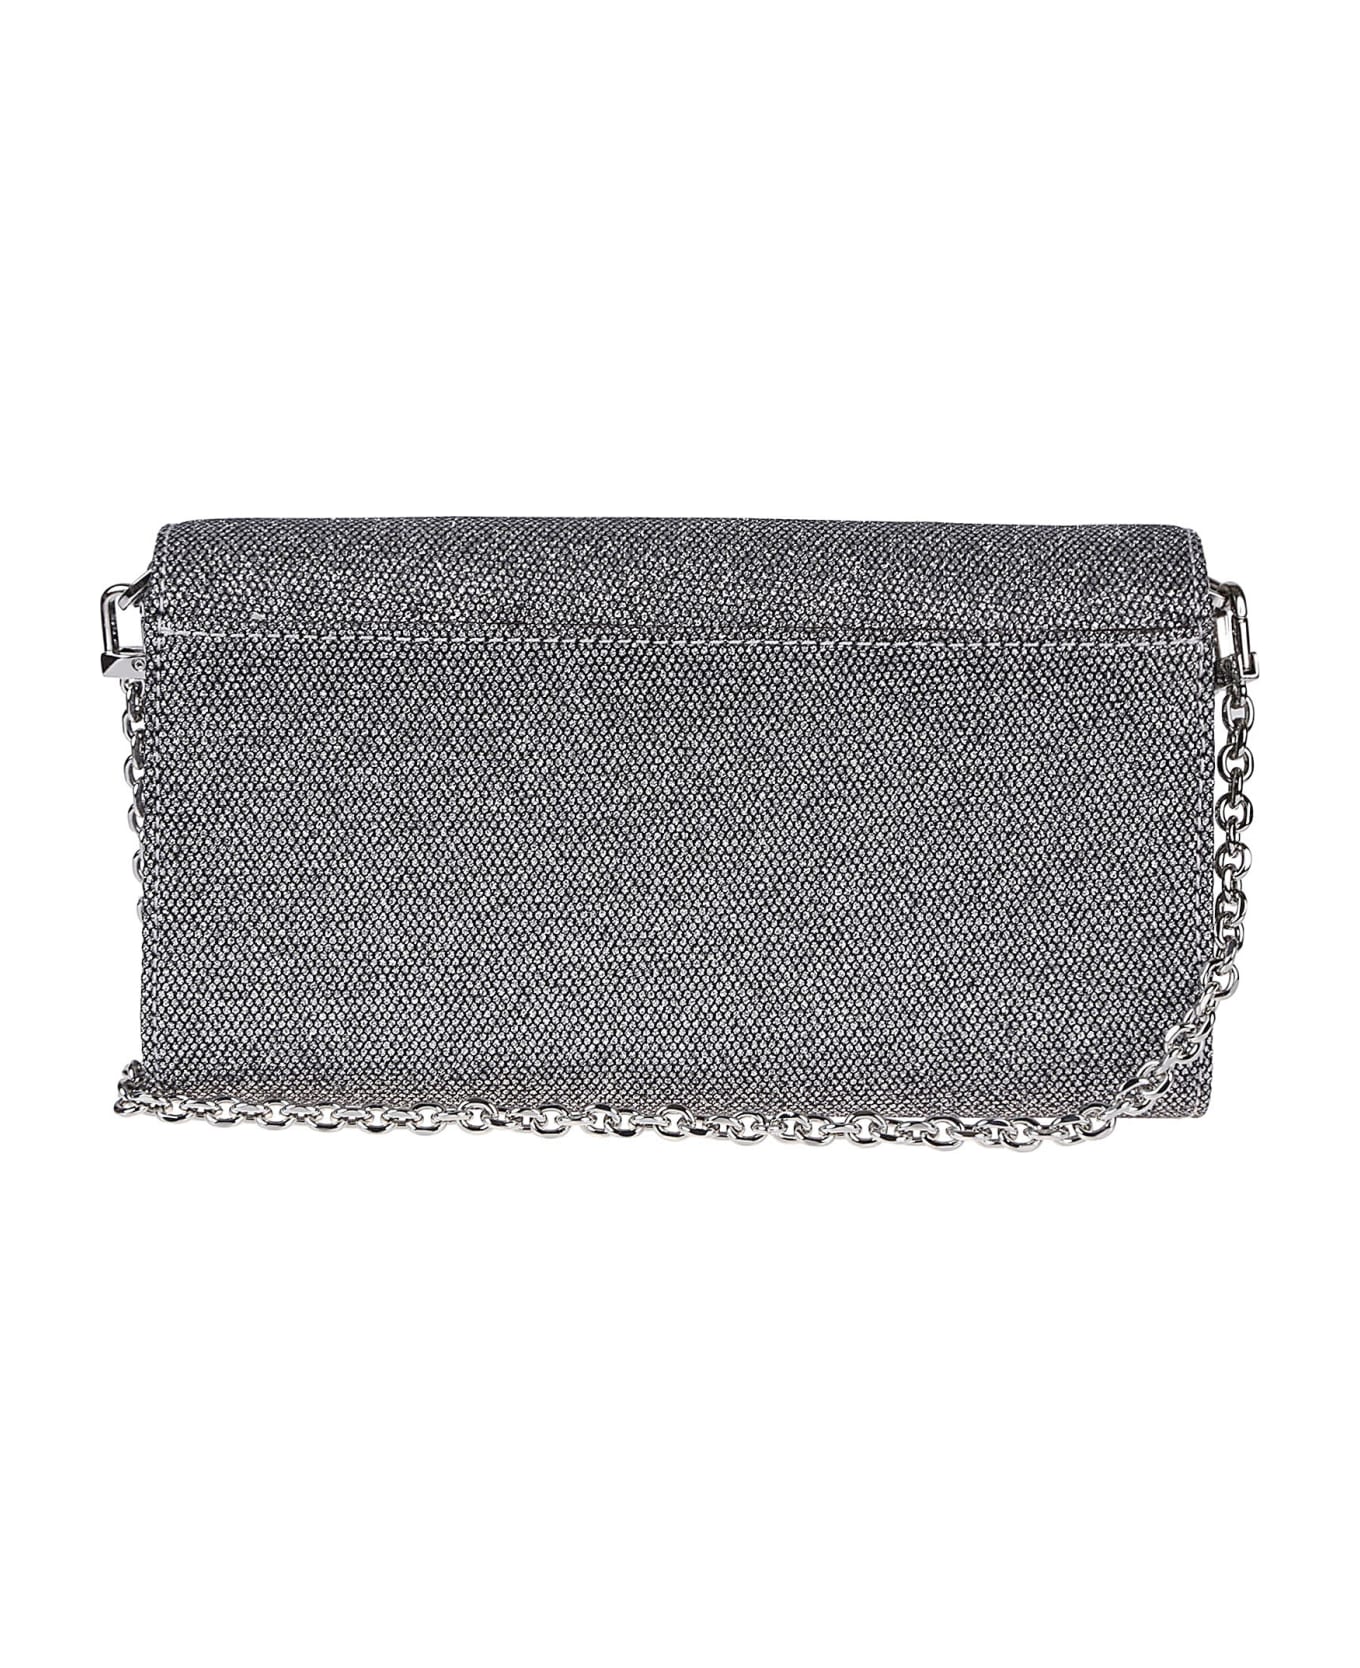 Michael Kors Large Mona Clutch Bag - Silver クラッチバッグ